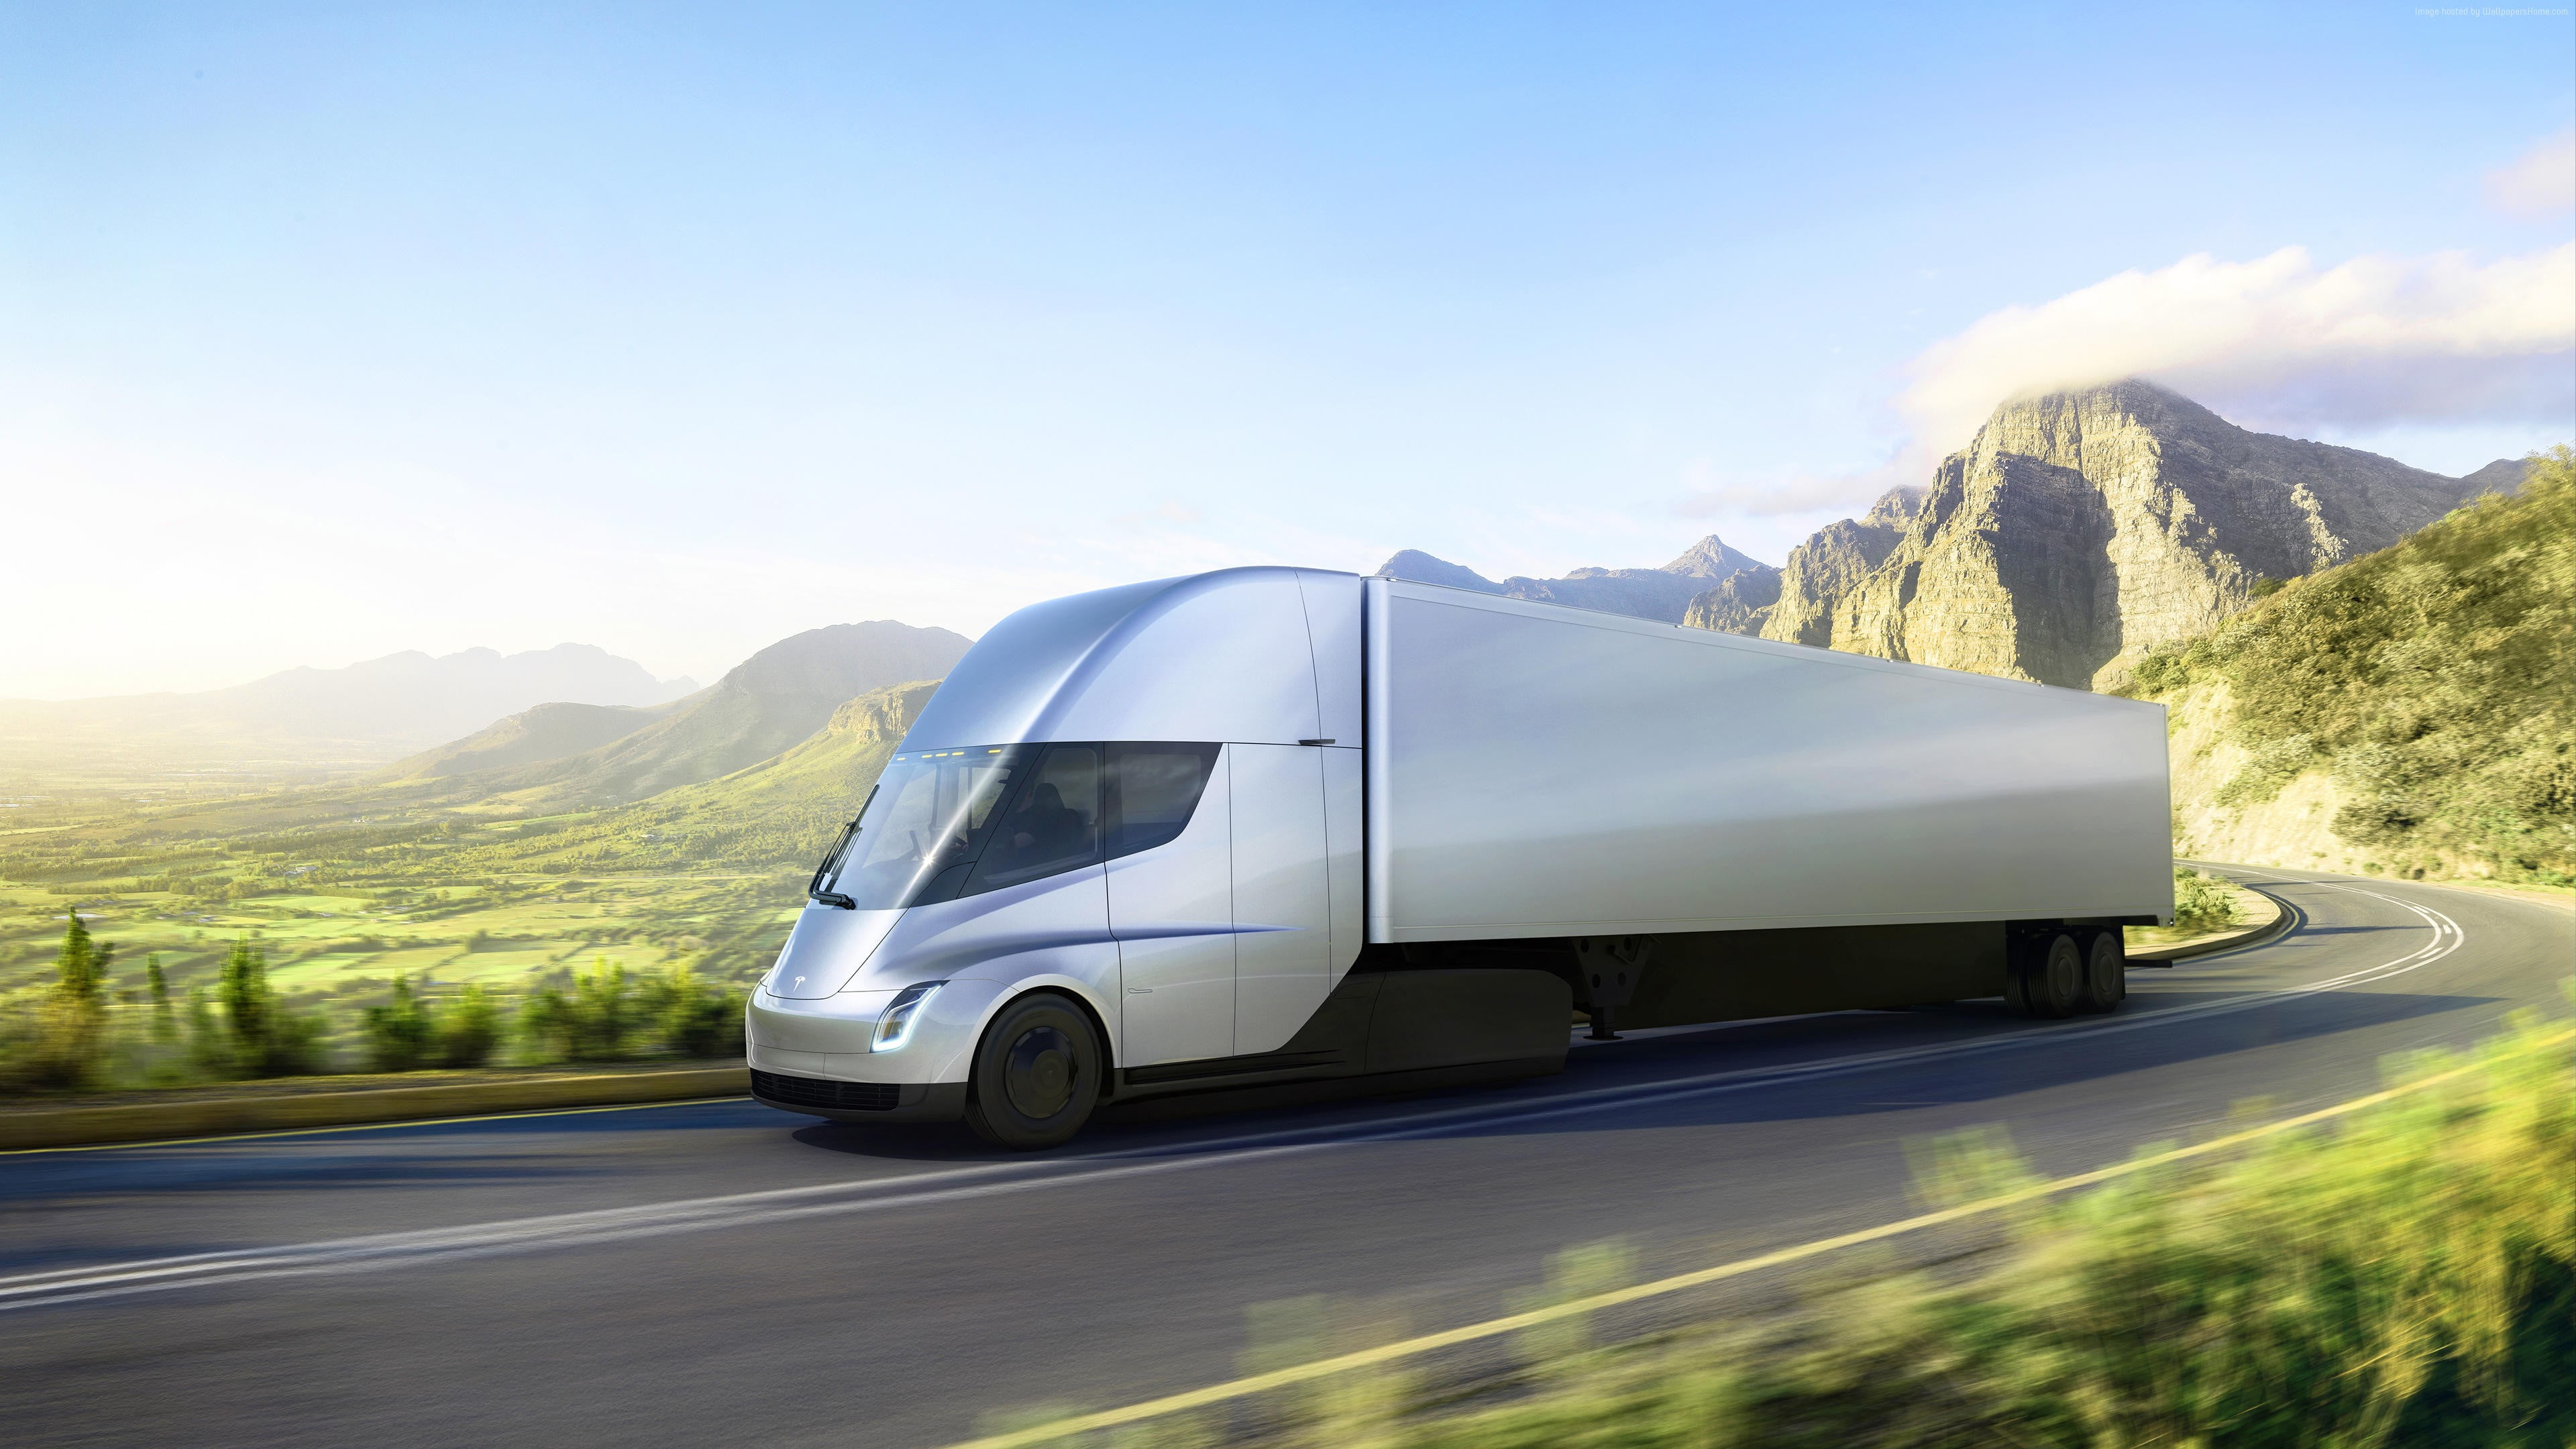 Time lapse photography of silver freight truck concept running on